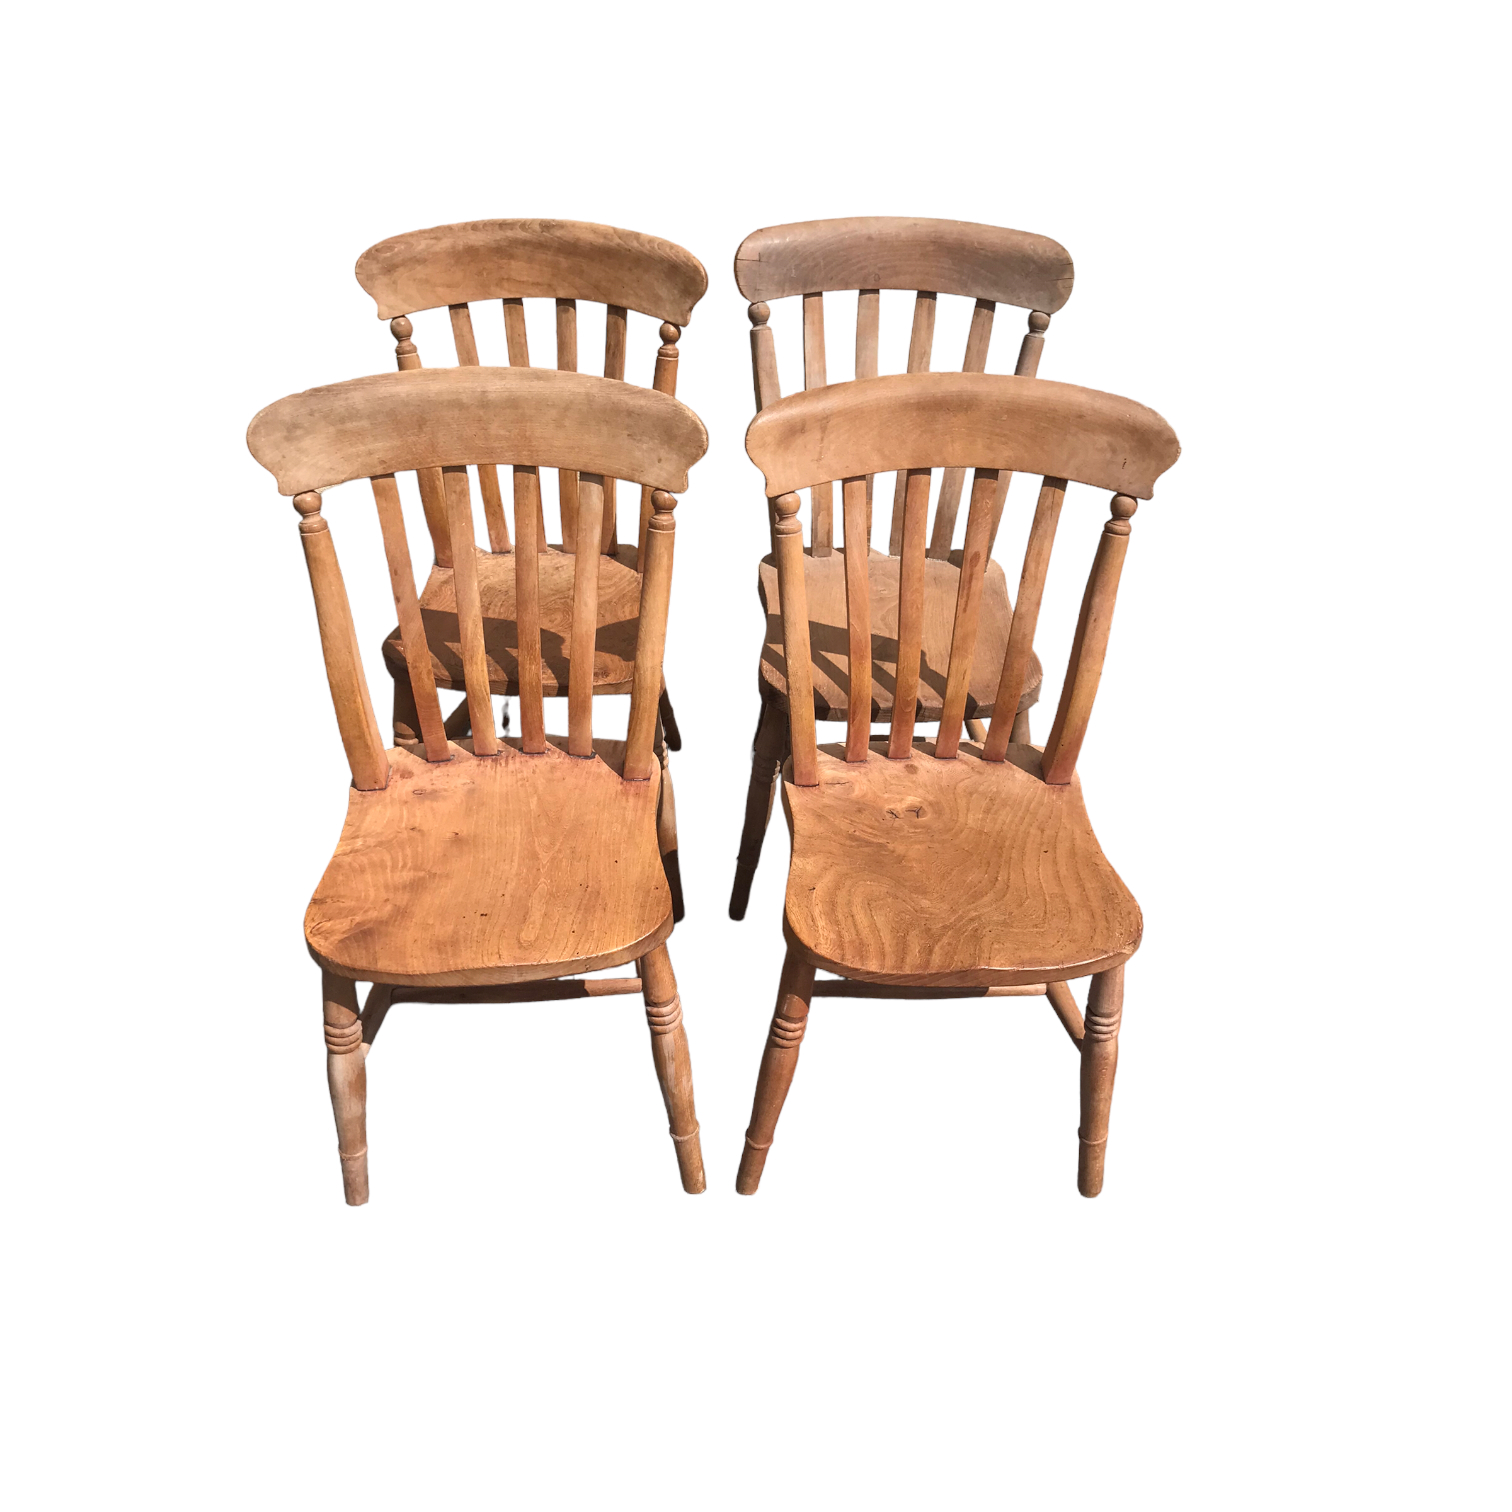 FOUR ANTIQUE VICTORIAN SLATT BACK COUNTRY DINING CHAIRS